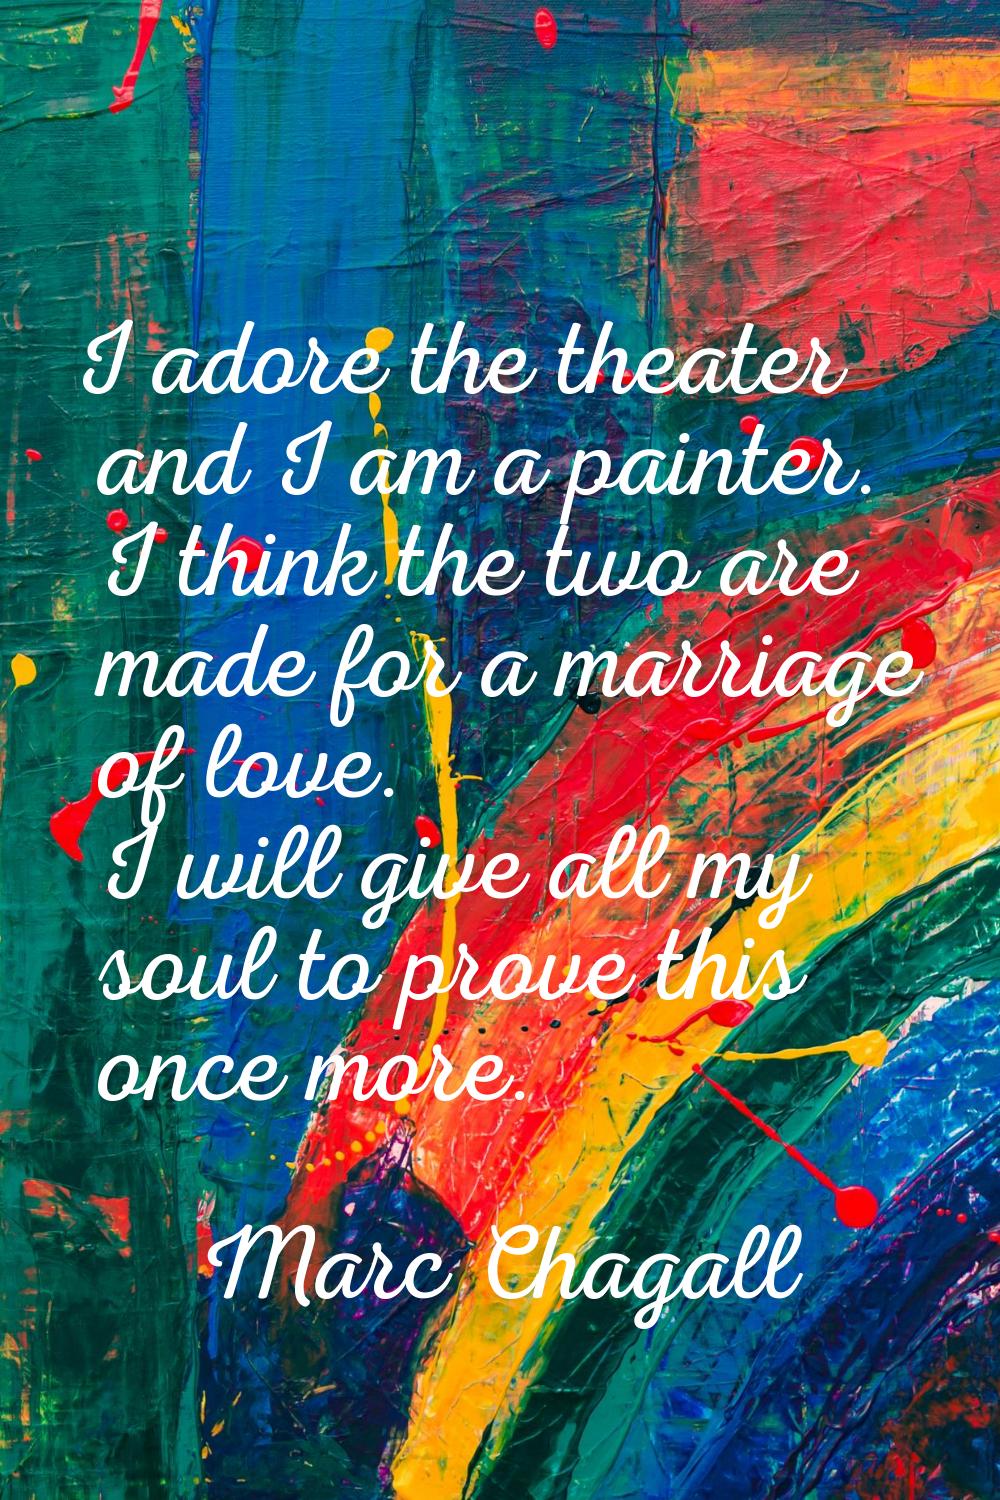 I adore the theater and I am a painter. I think the two are made for a marriage of love. I will giv